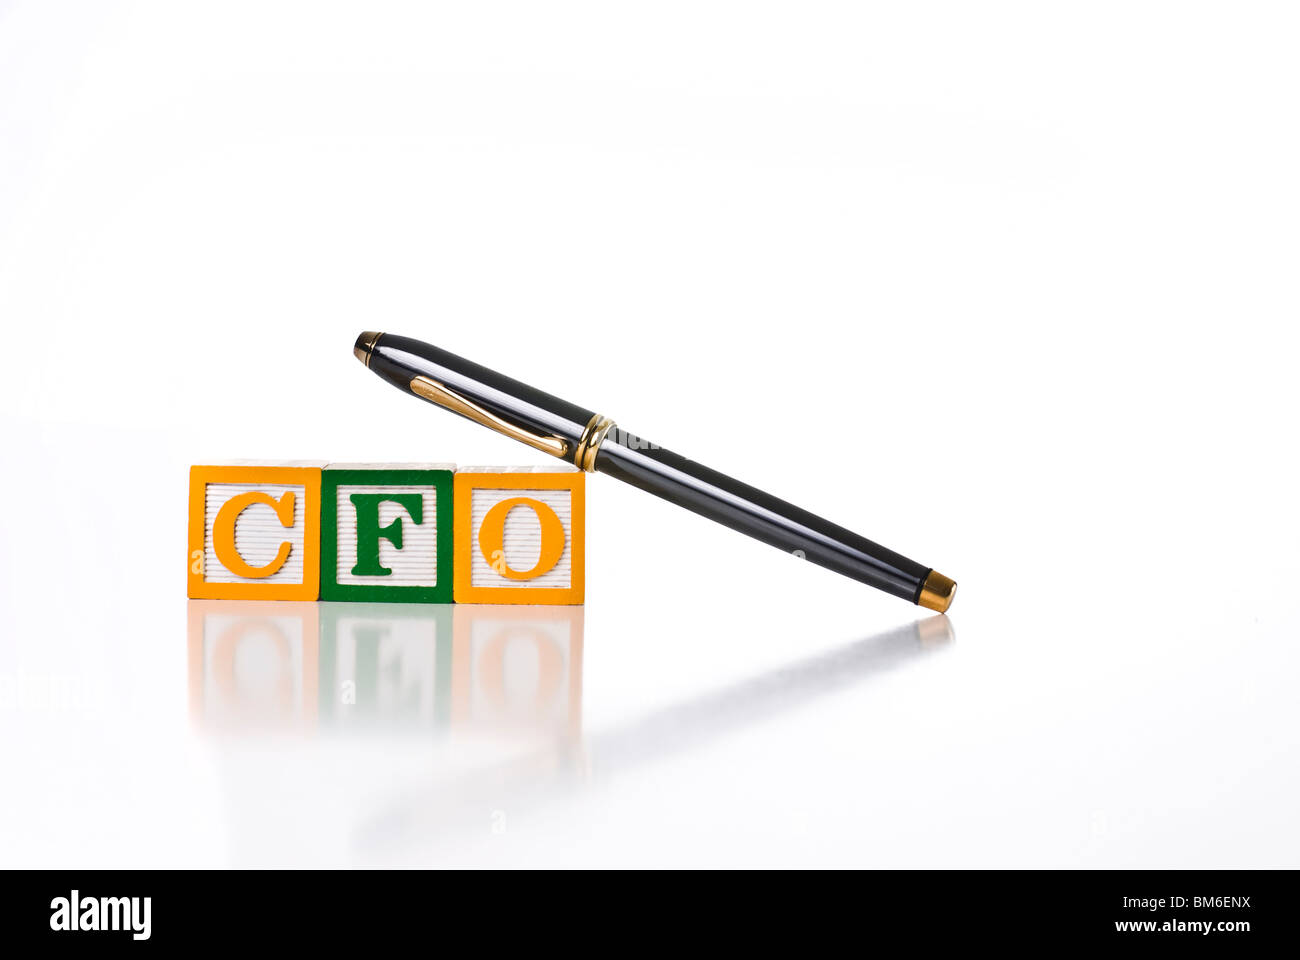 Colorful children's blocks spelling CFO with executive style pen Stock Photo